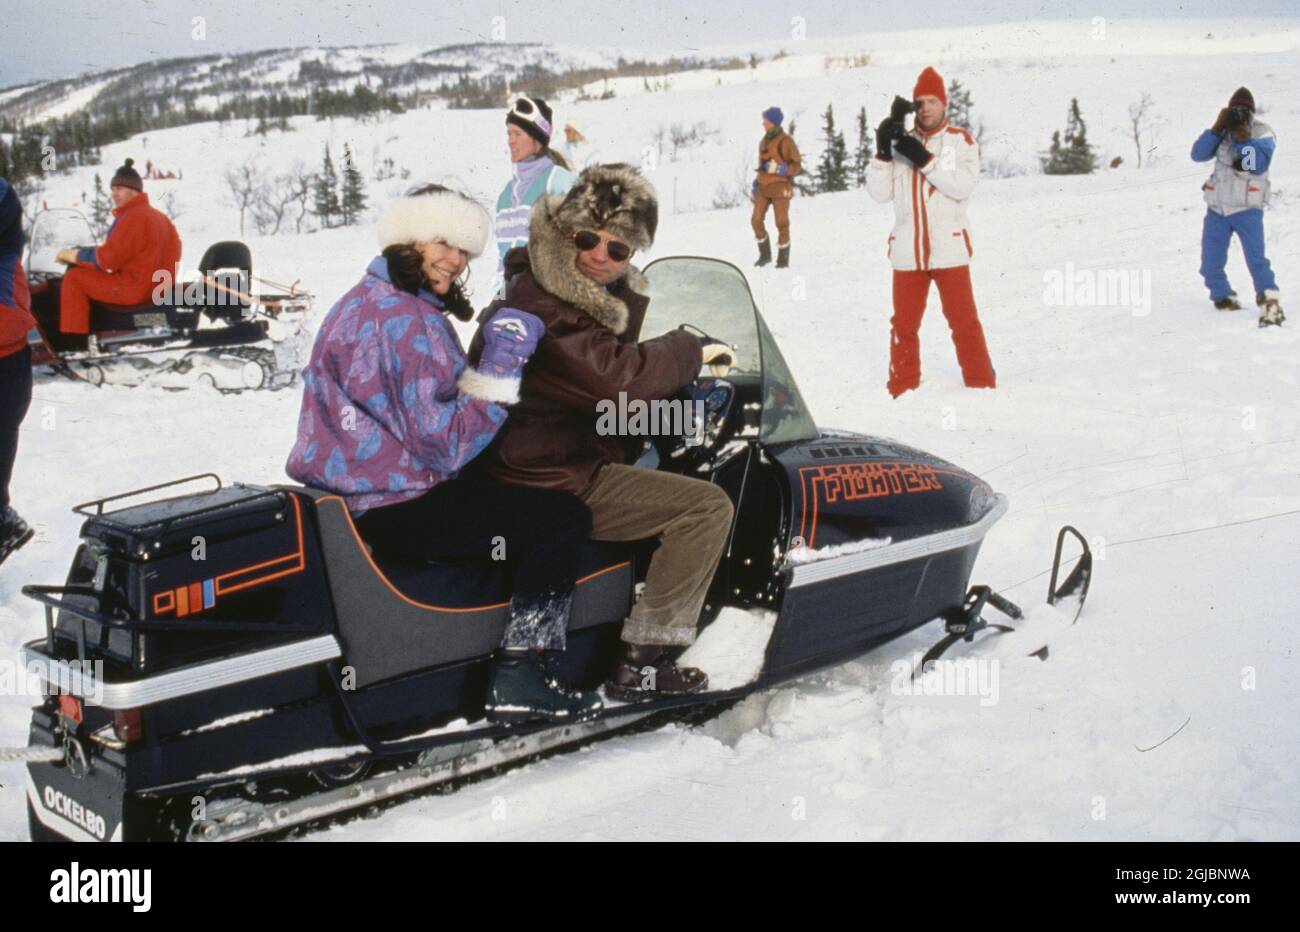 Queen SIlvia and King Carl Gustaf on a snowmobile in Storlien, 1991 (c) Charles Hammarsten / IBL  Stock Photo